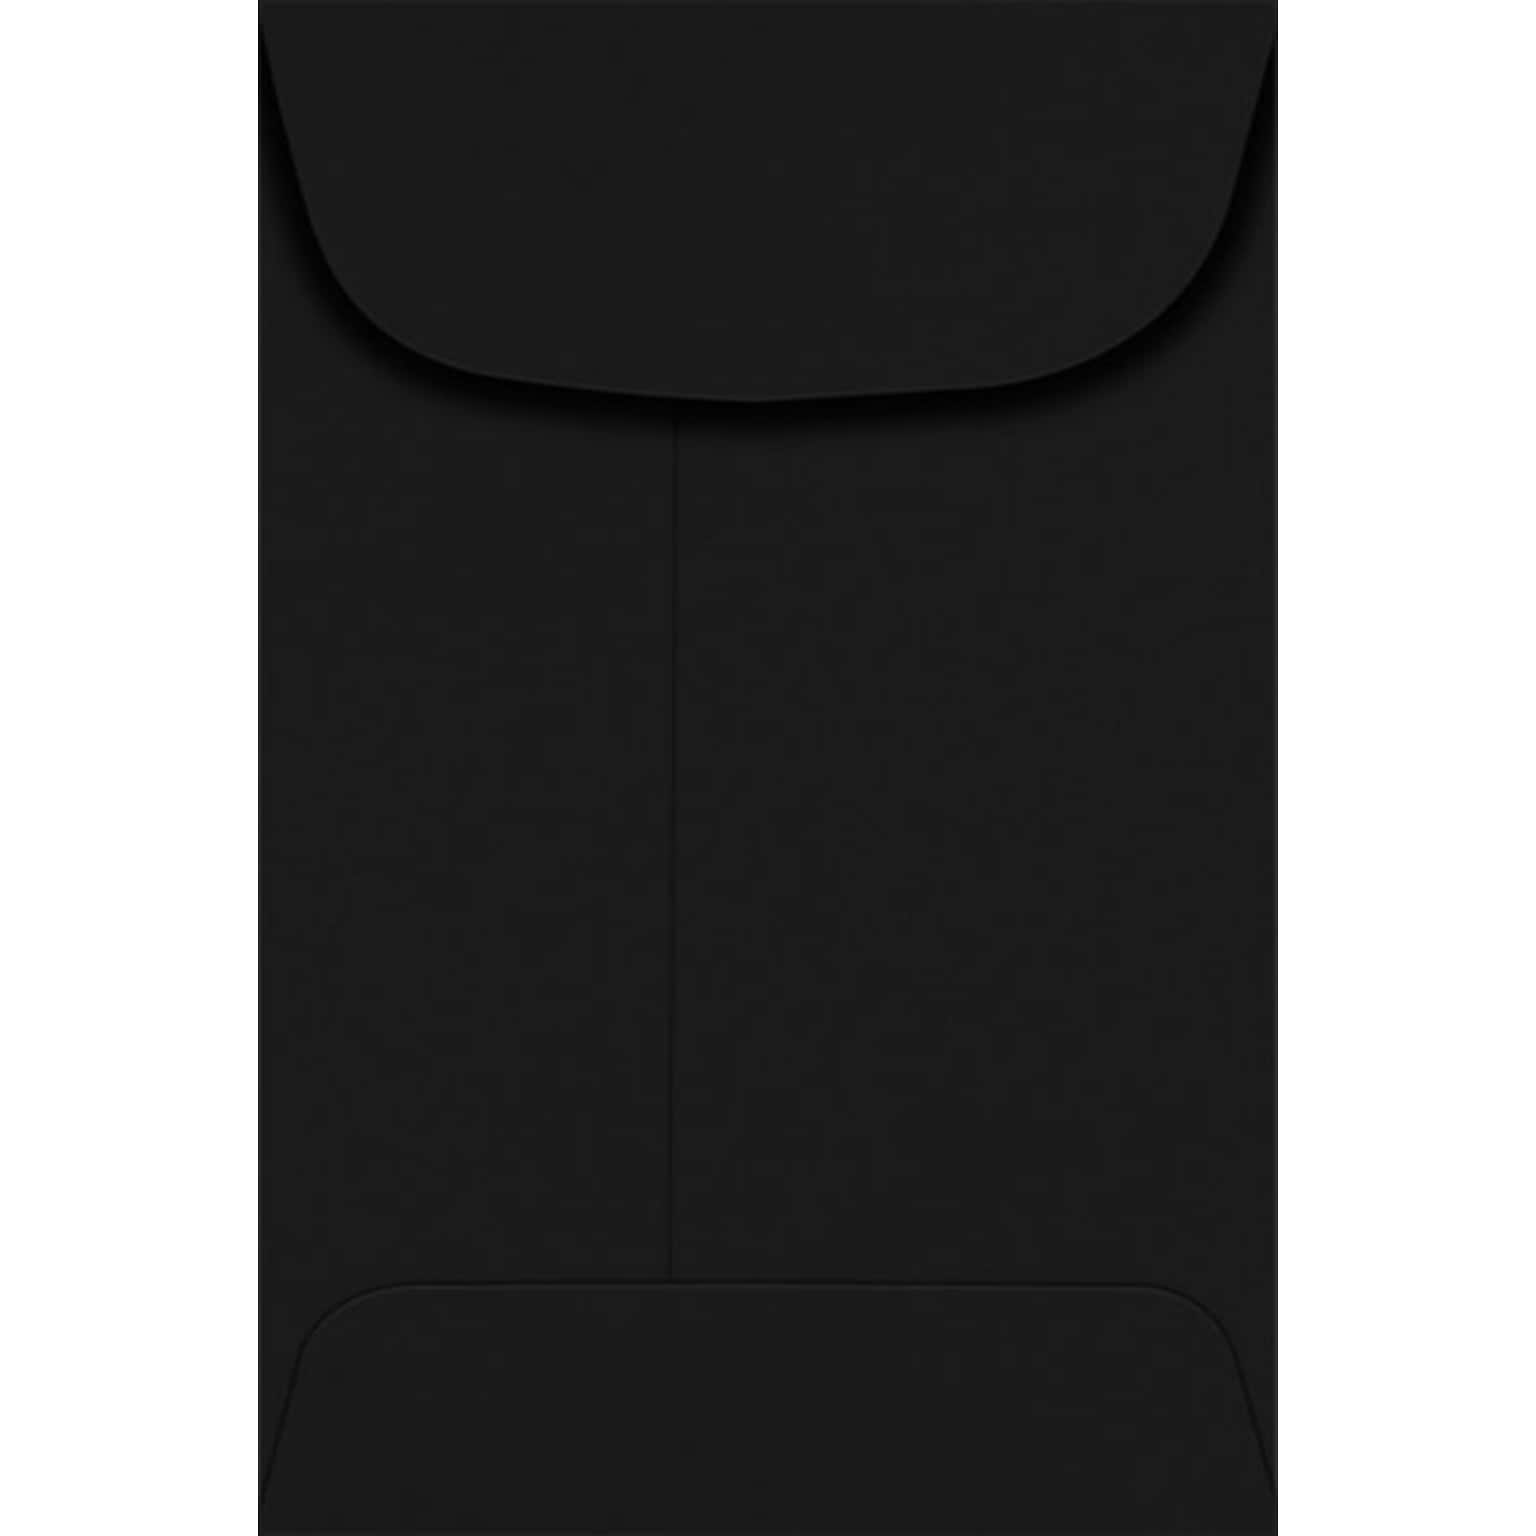 LUX #4 Coin Envelopes (3 x 4 1/2) - Midnight Black 250/Pack, 80lb. Midnight Black (LUX-4CO-B-250)